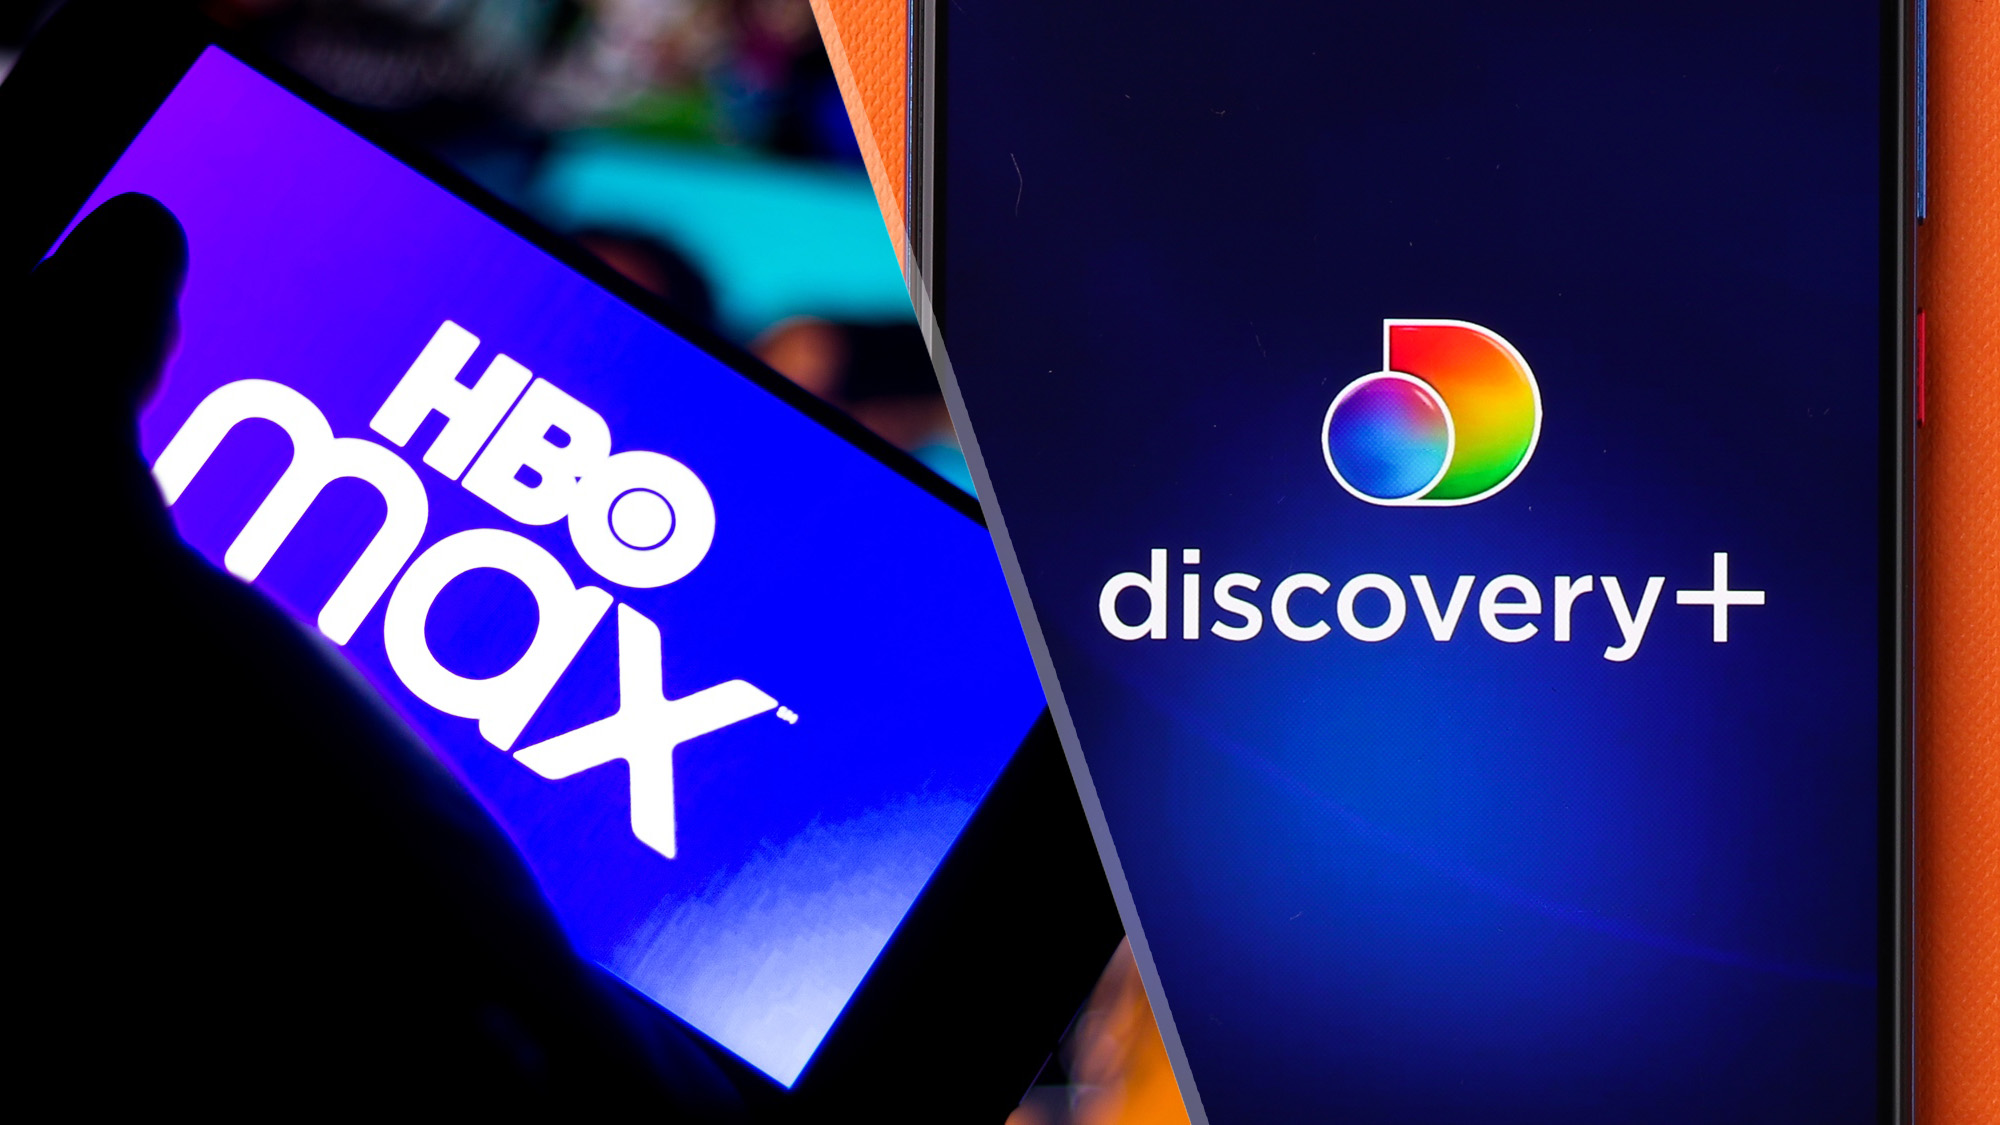 Discovery Plus reportedly not disappearing in HBO Max merger